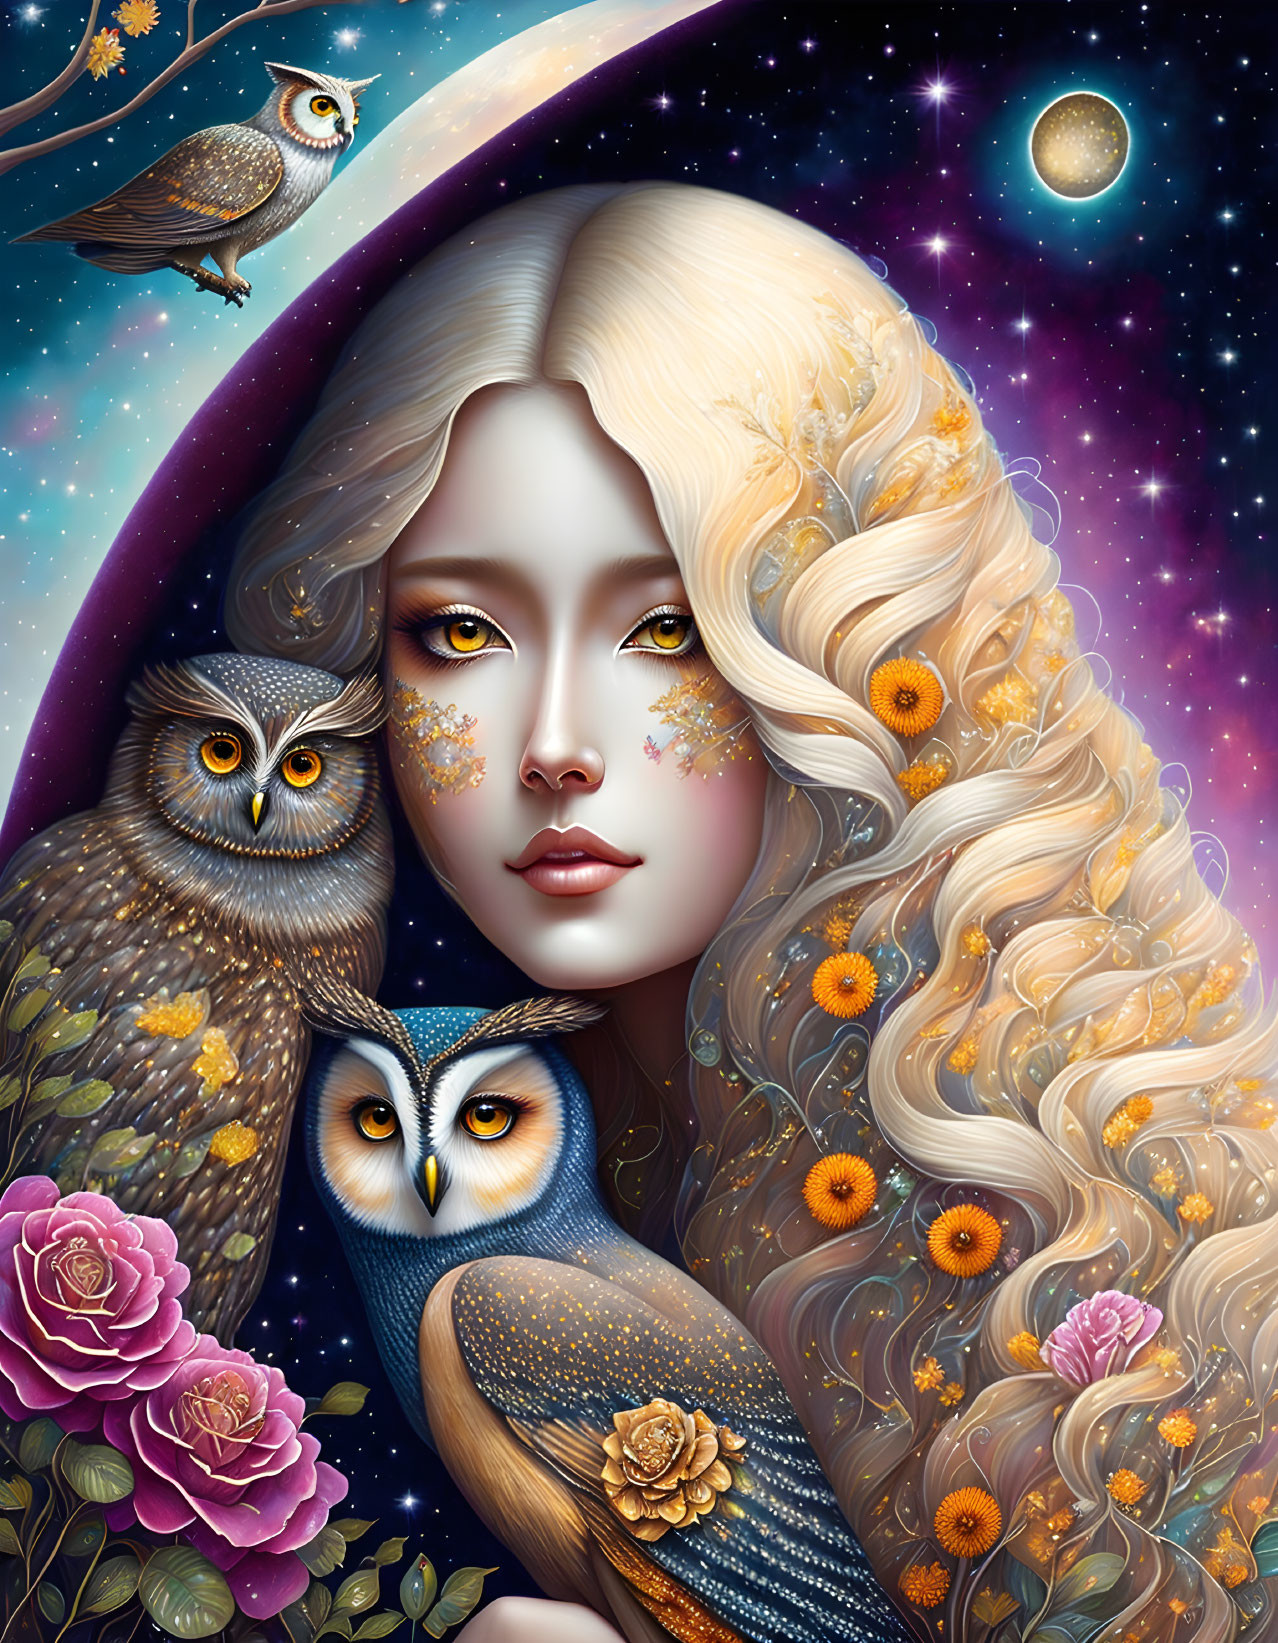 Fantasy illustration of woman with golden hair, owls, roses, and celestial bodies.